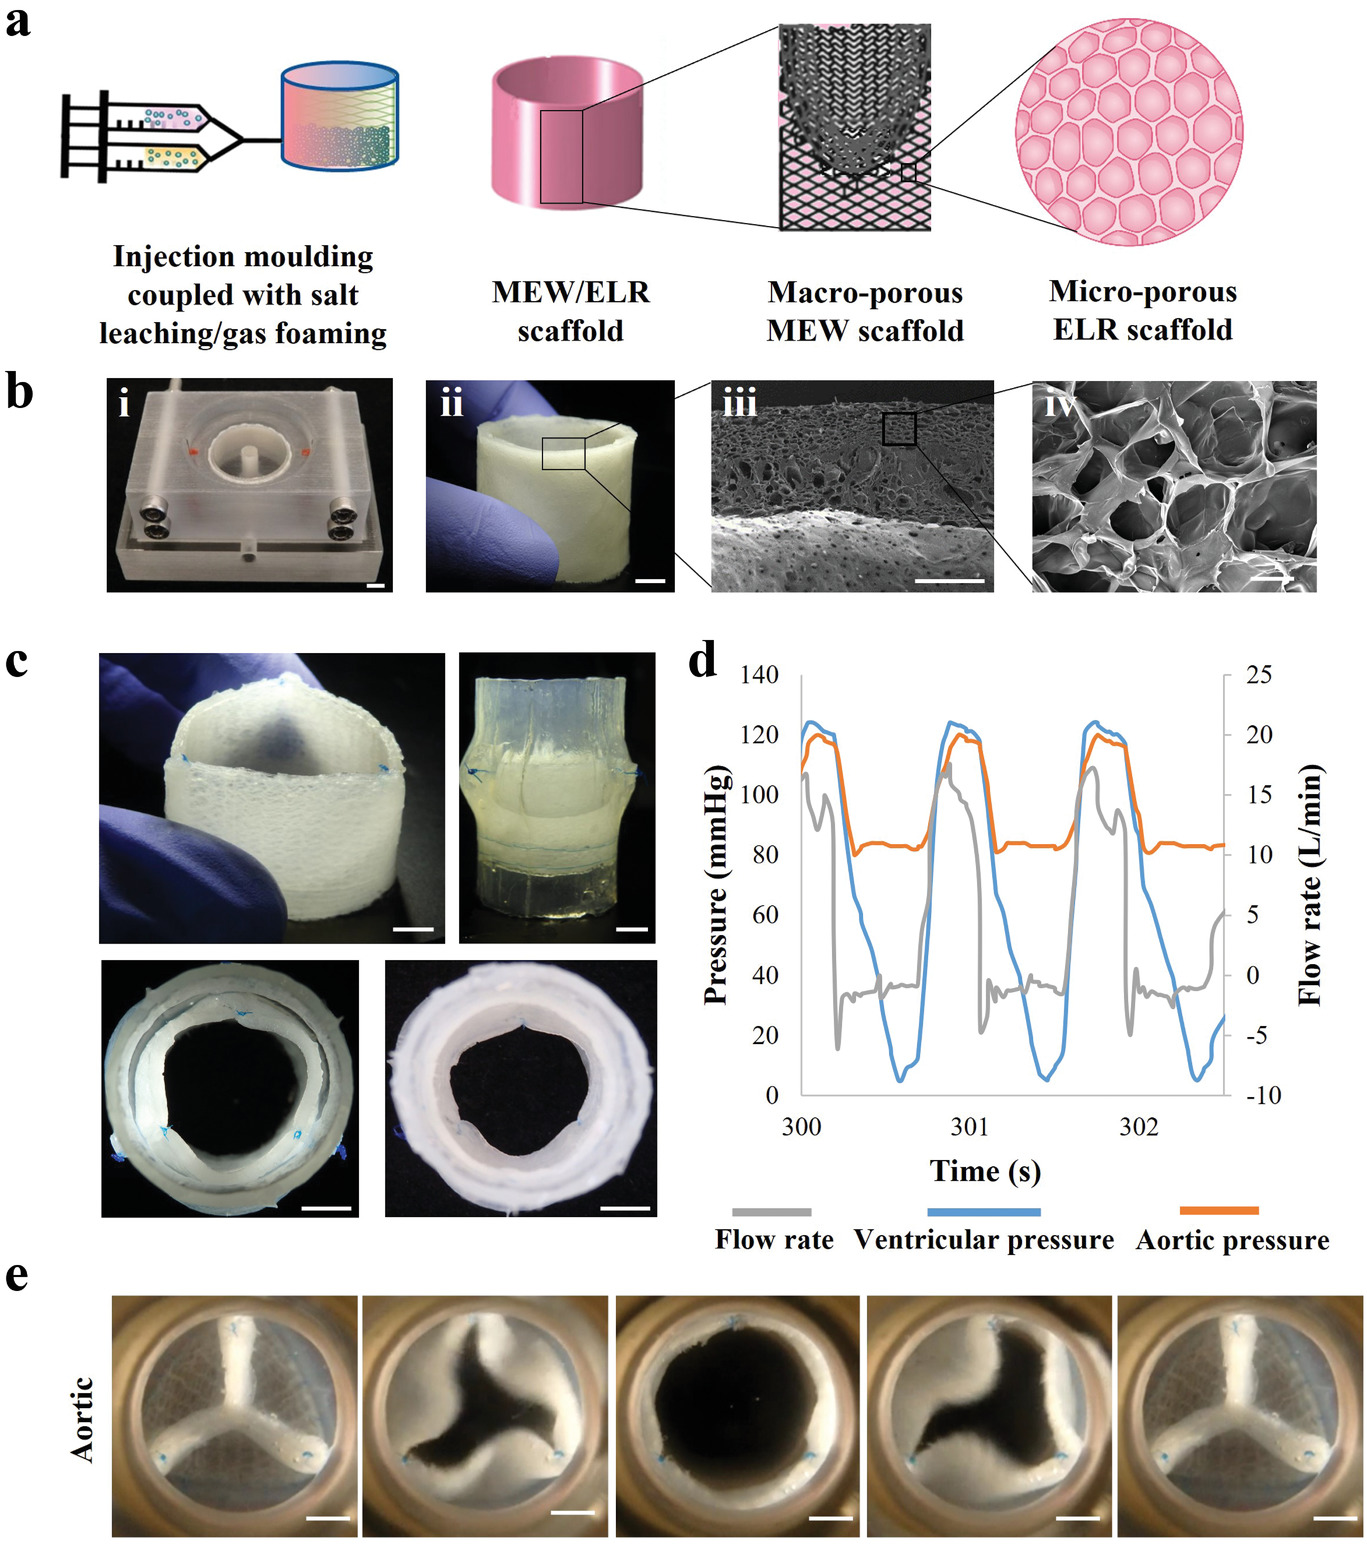 Fabricating the 3D printed heart valves. Image via Advanced Functional Materials.